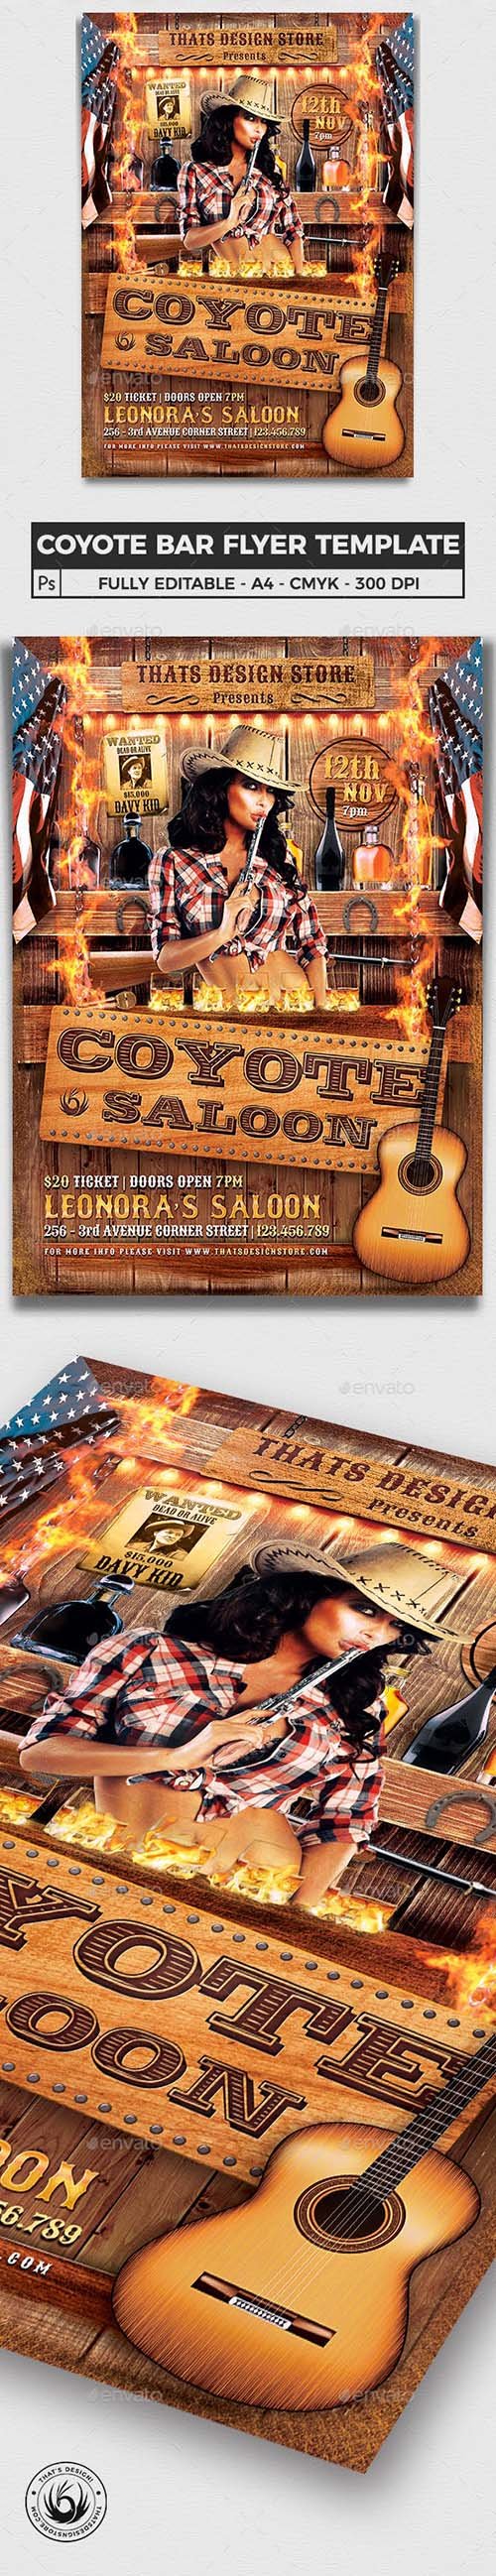 Coyote Bar Flyer Template 7364462